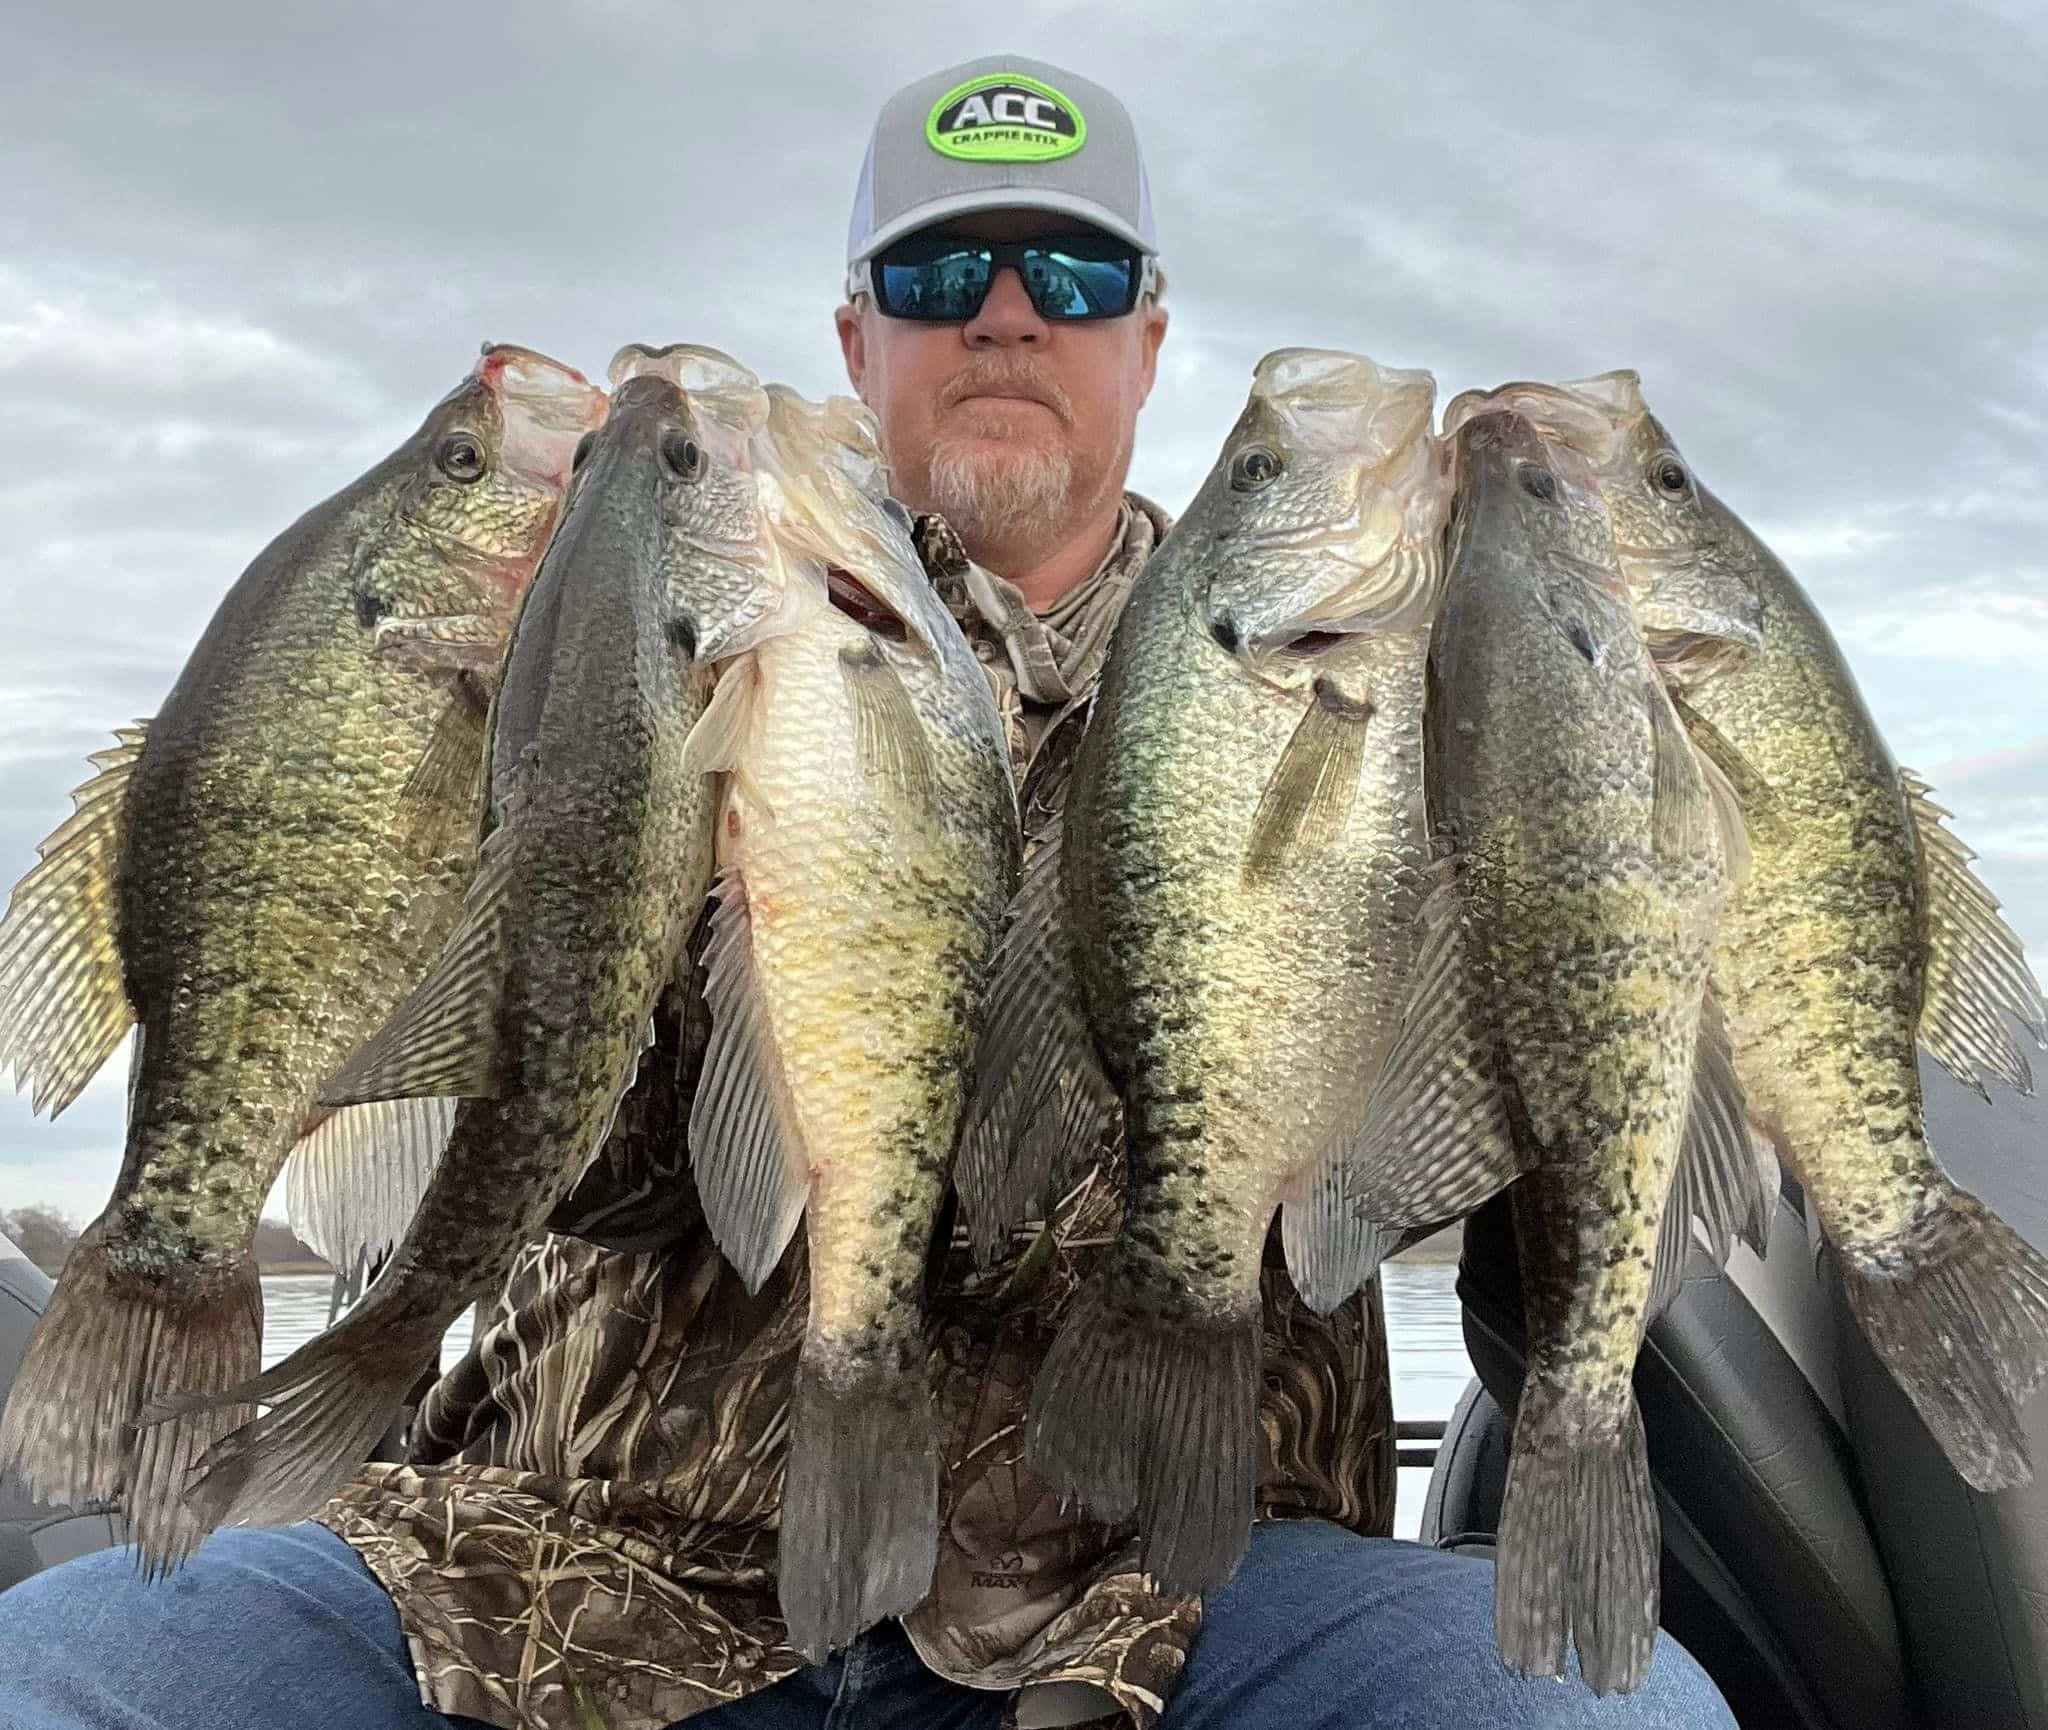 Target shallow-spawning crappie from a kayak